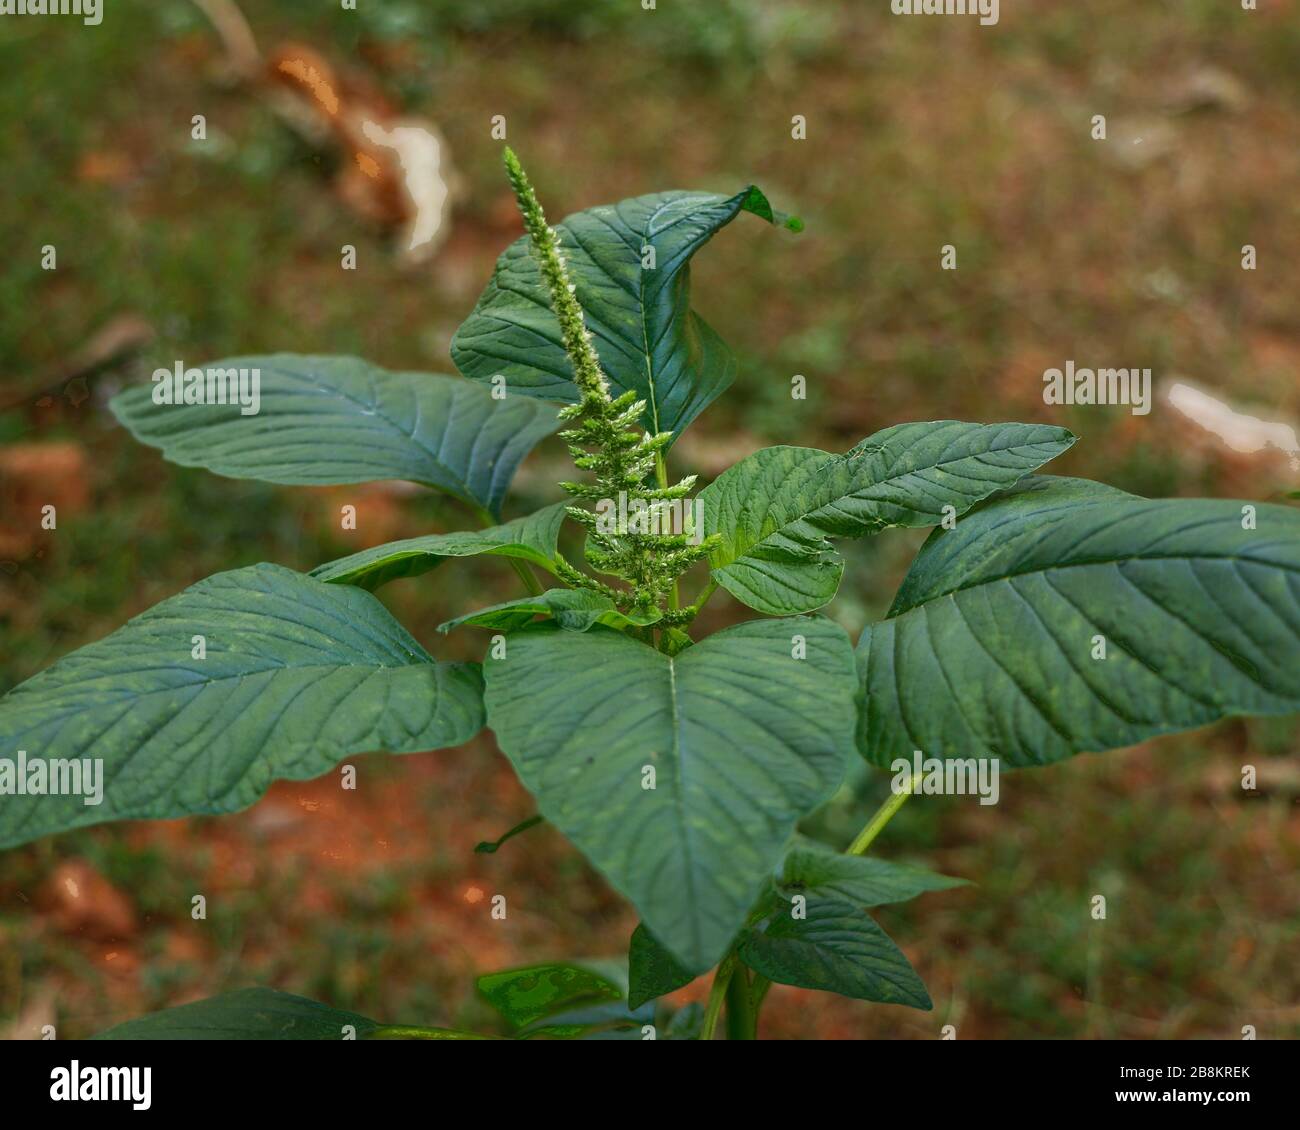 close up view of a Green amaranth (Amaranthus viridis), a leafy healty vegetable popular in south India. Stock Photo